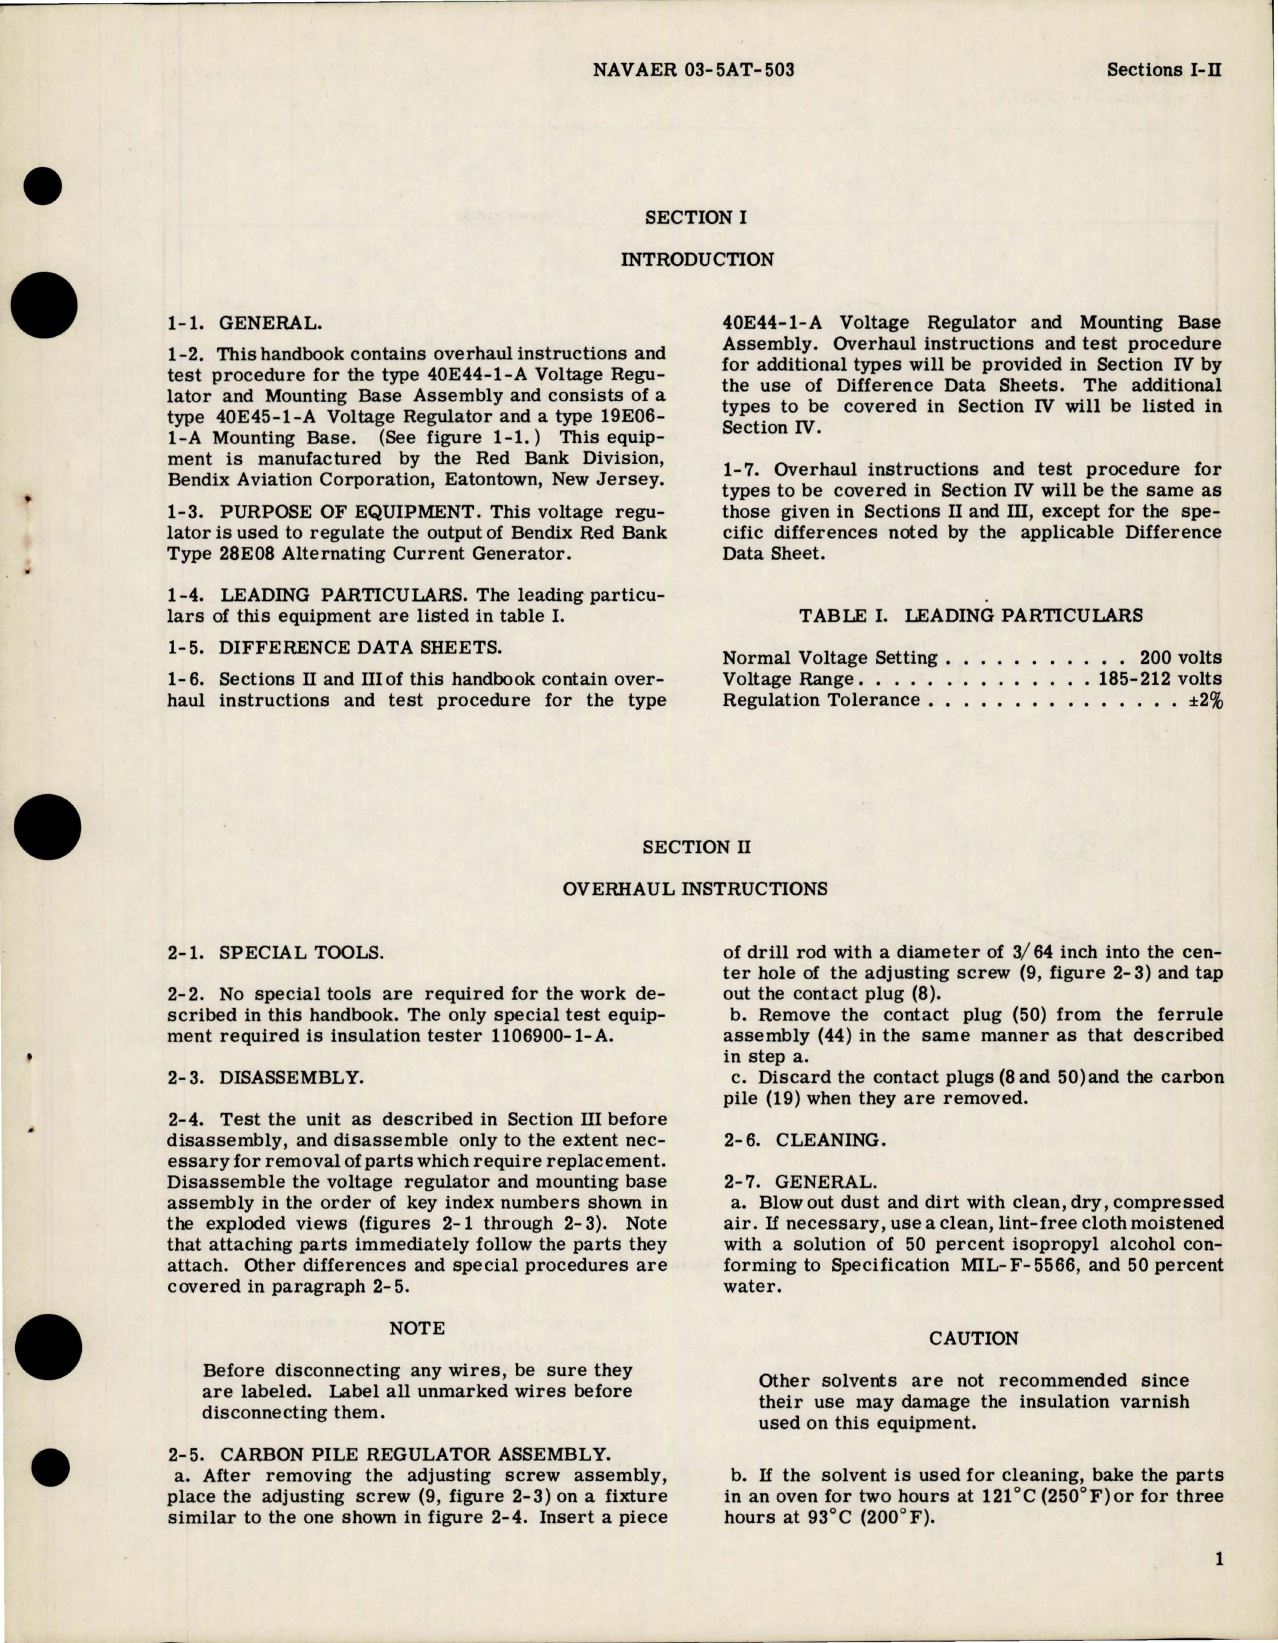 Sample page 5 from AirCorps Library document: Overhaul Instructions for Voltage Regulator and Mounting Base Assembly - Type 40E44-1-A